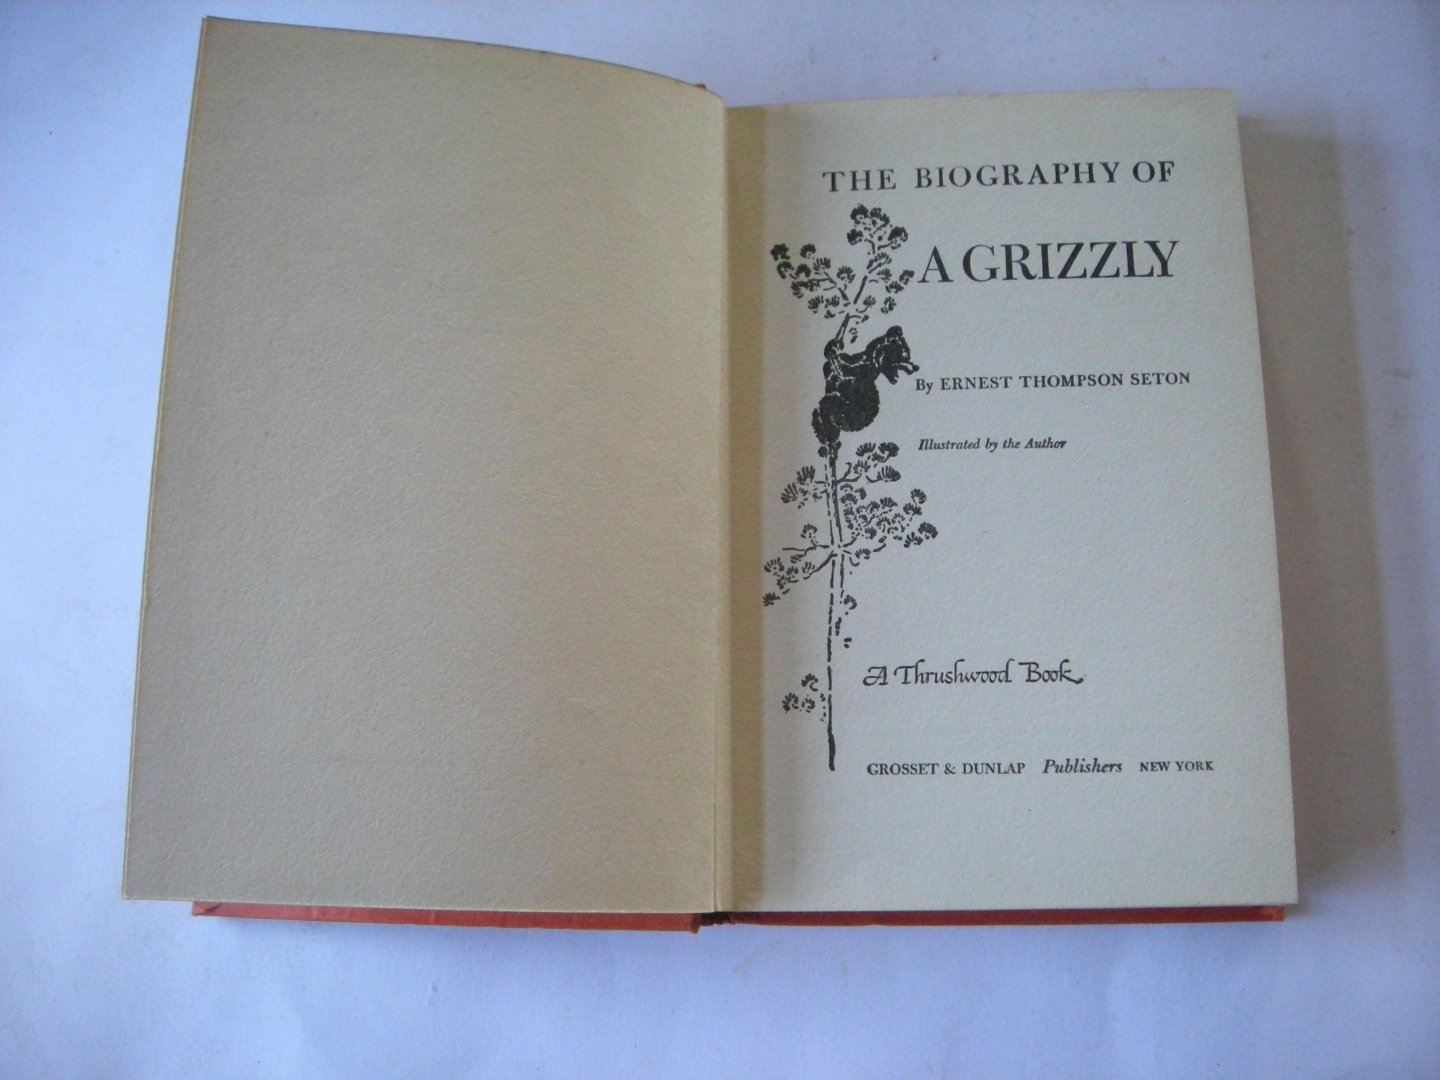 Thompson Seton, Ernest, text and illustr. - The Biography of a Grizzly